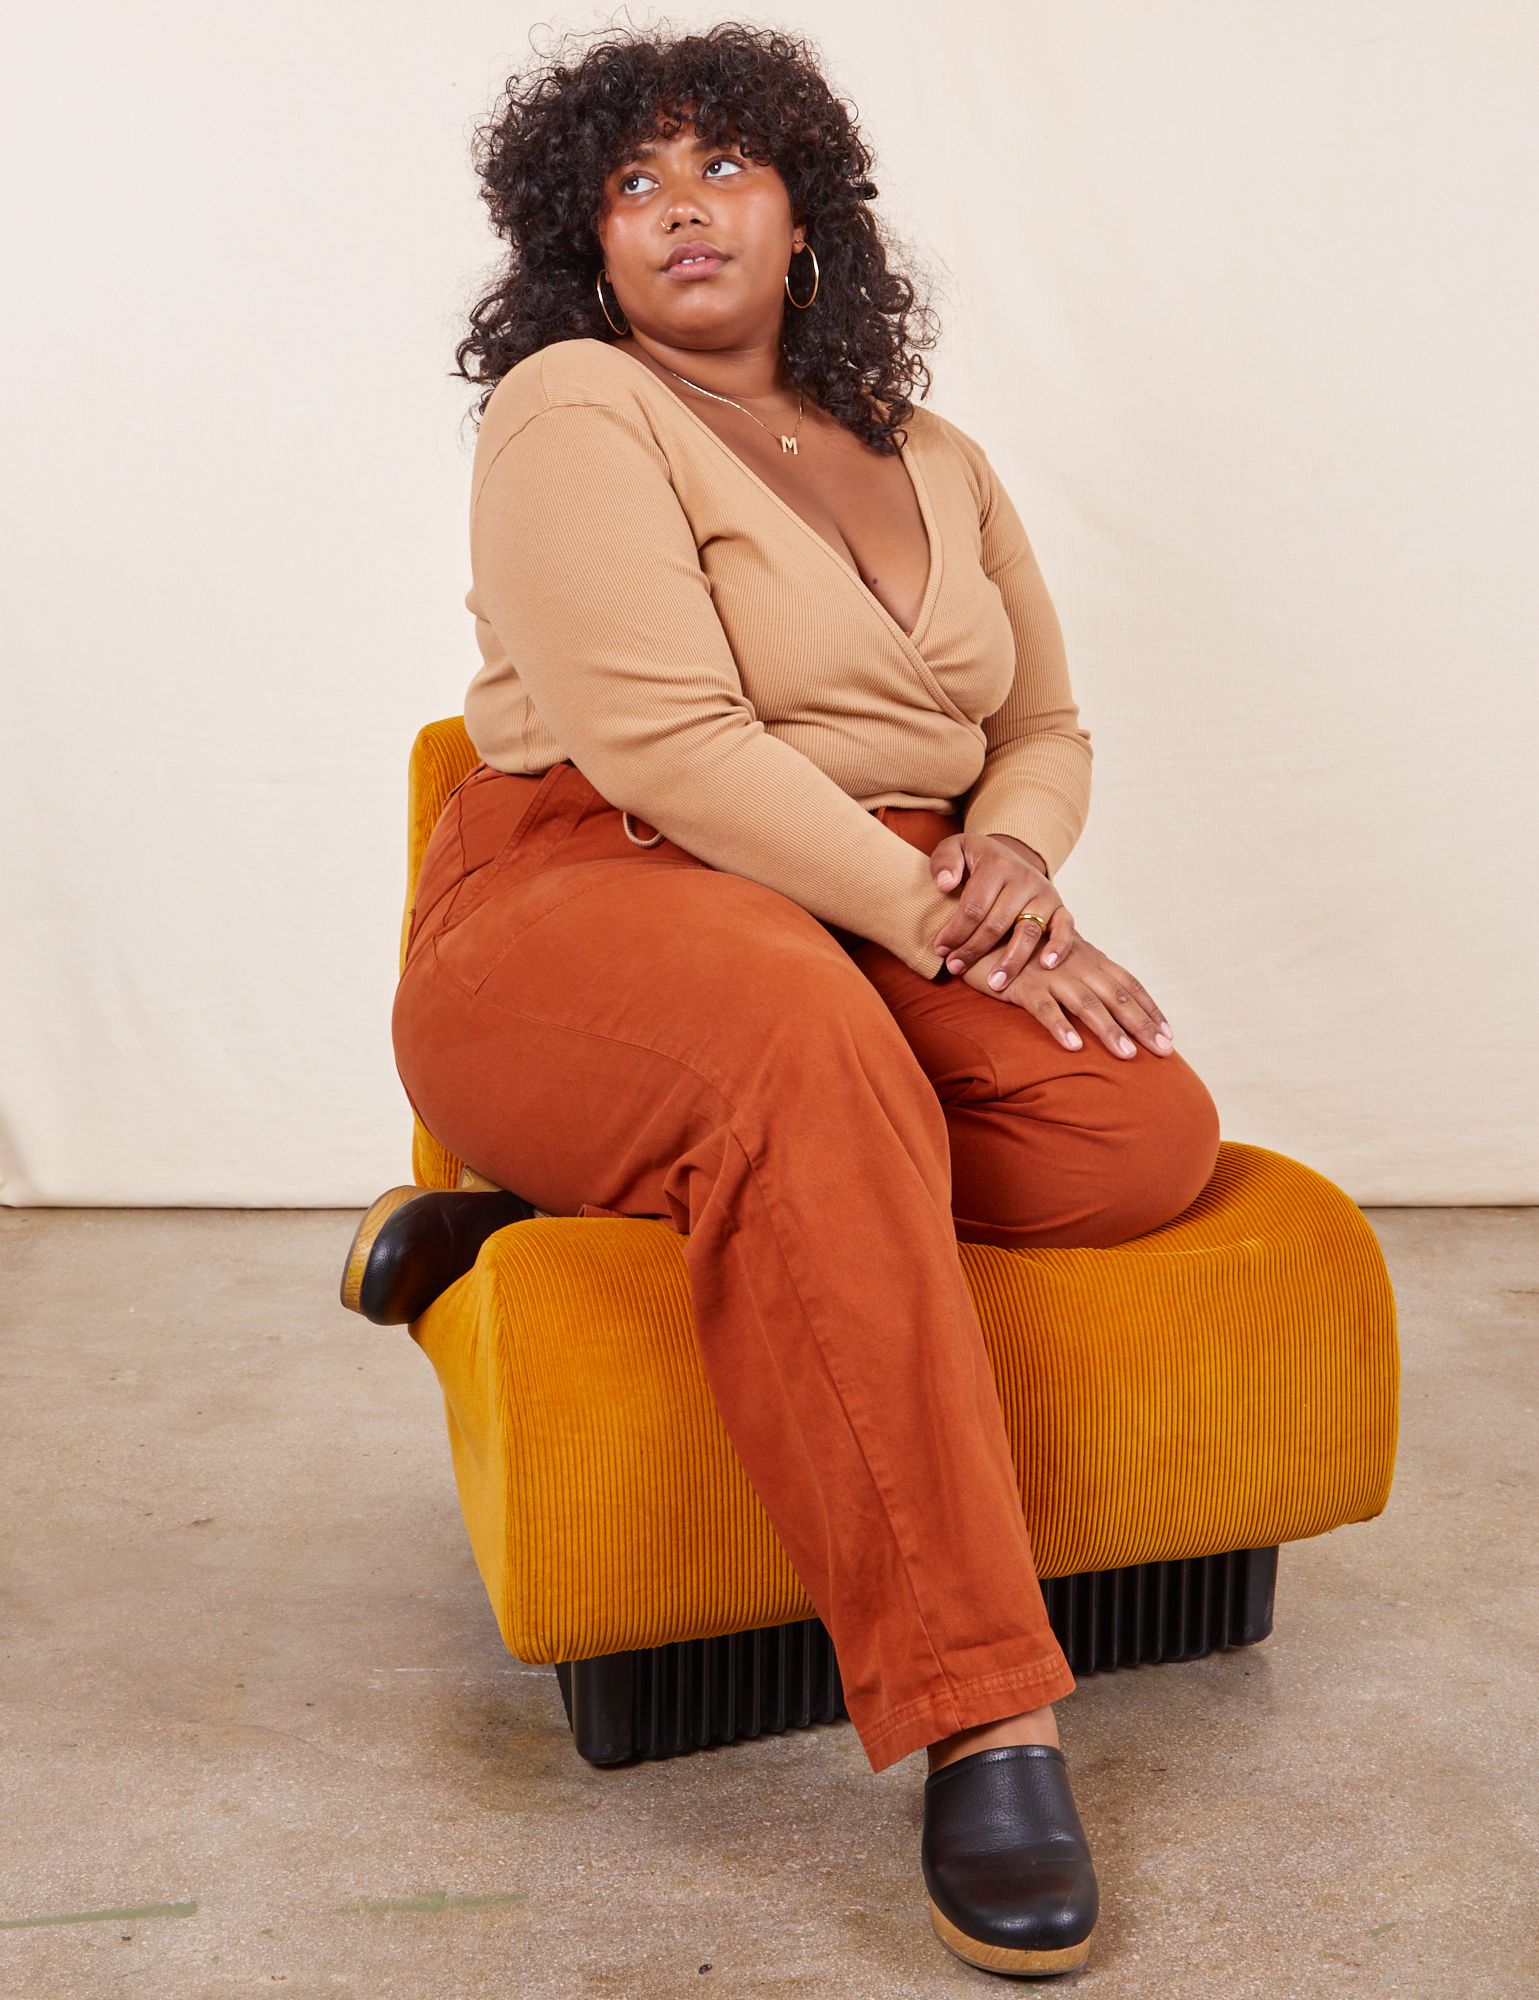 Morgan is sitting in an upholstered orange chair. She is wearing Work Pants in Burnt Terracotta paired with a tan Wrap Top